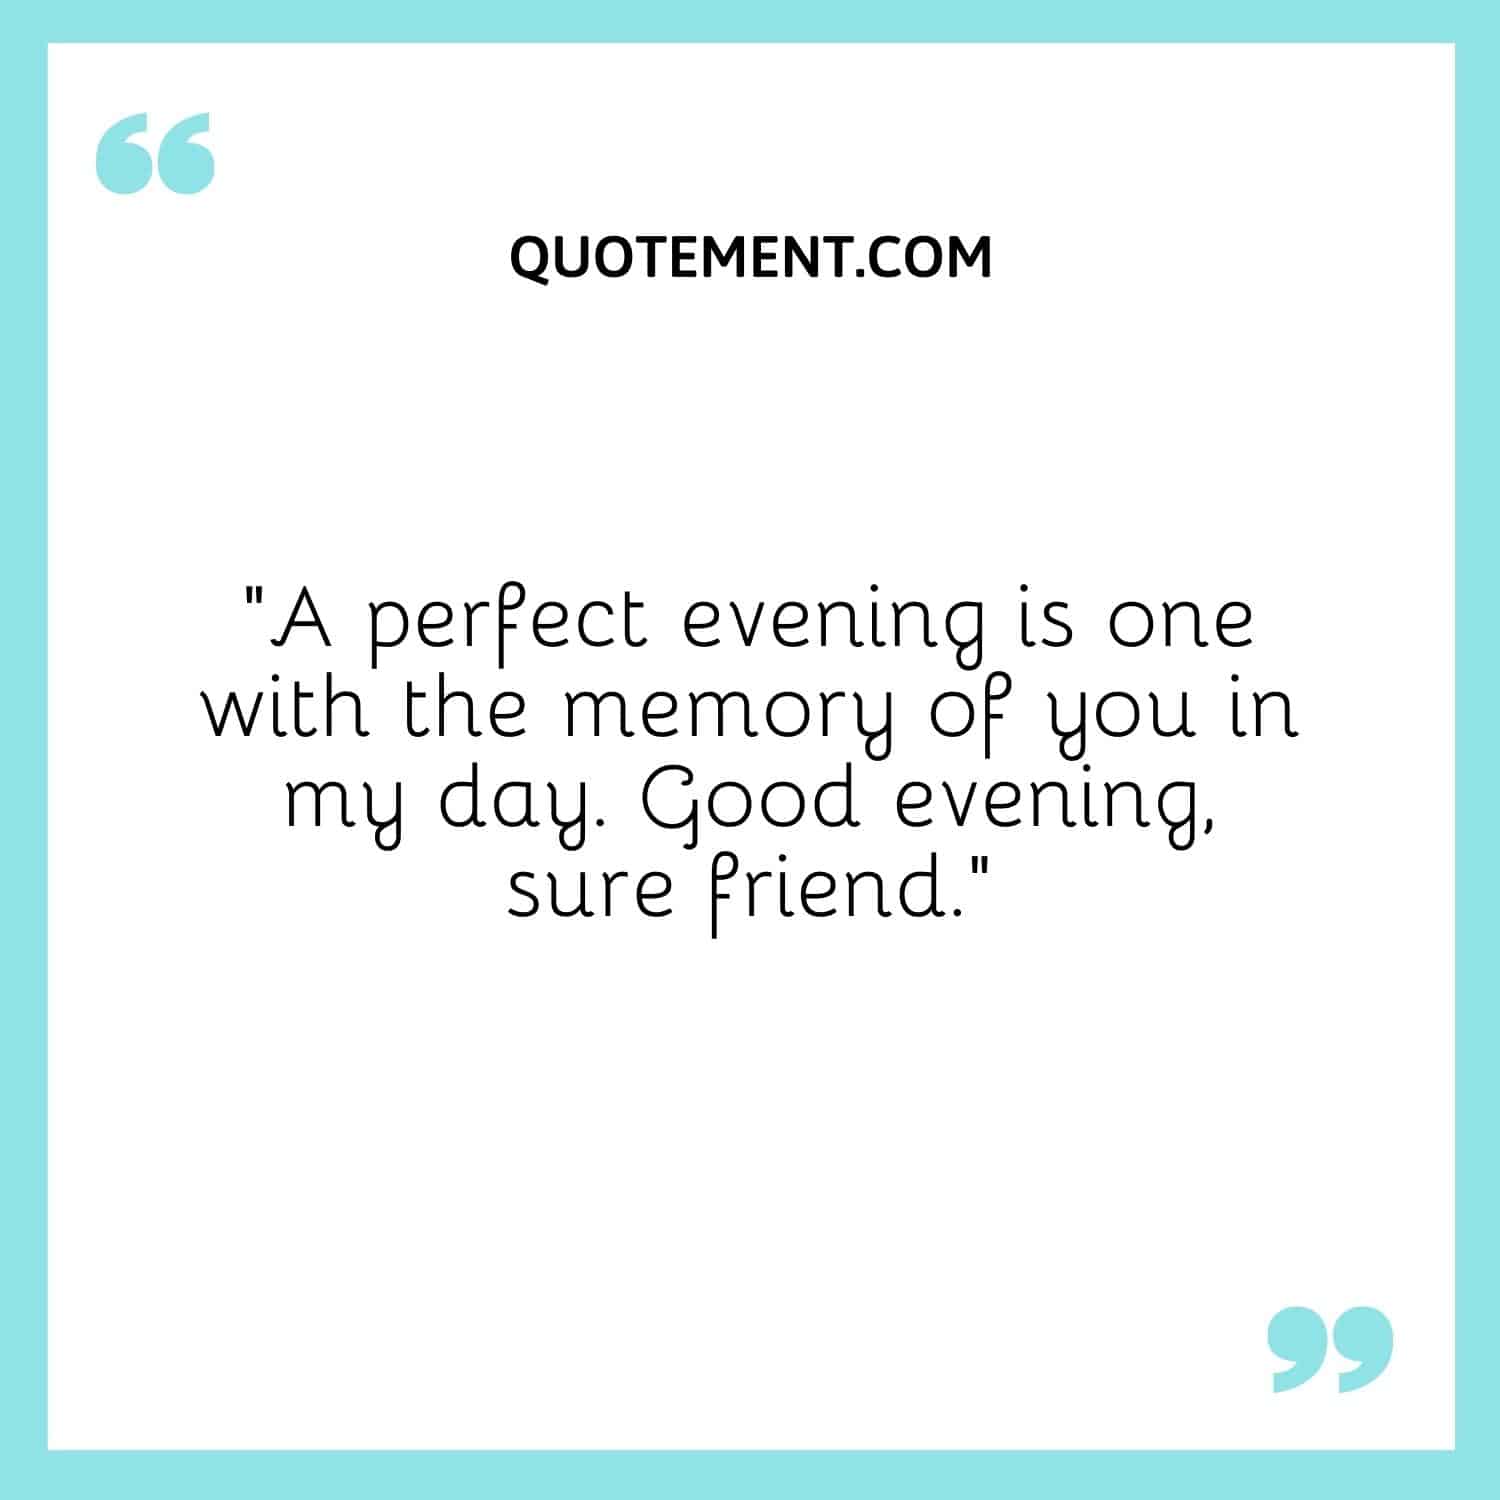 A perfect evening is one with the memory of you in my day.